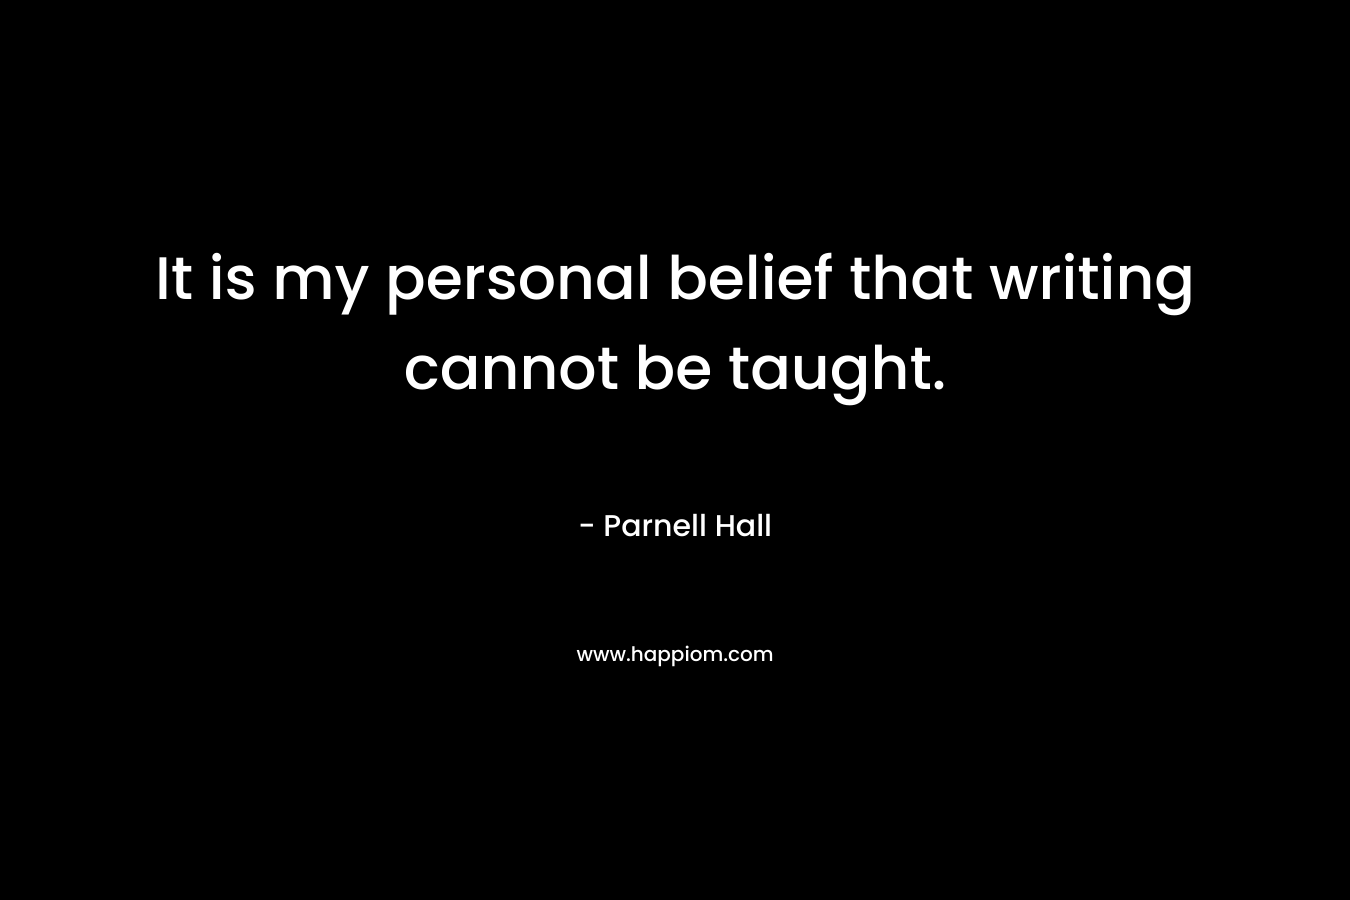 It is my personal belief that writing cannot be taught. – Parnell Hall